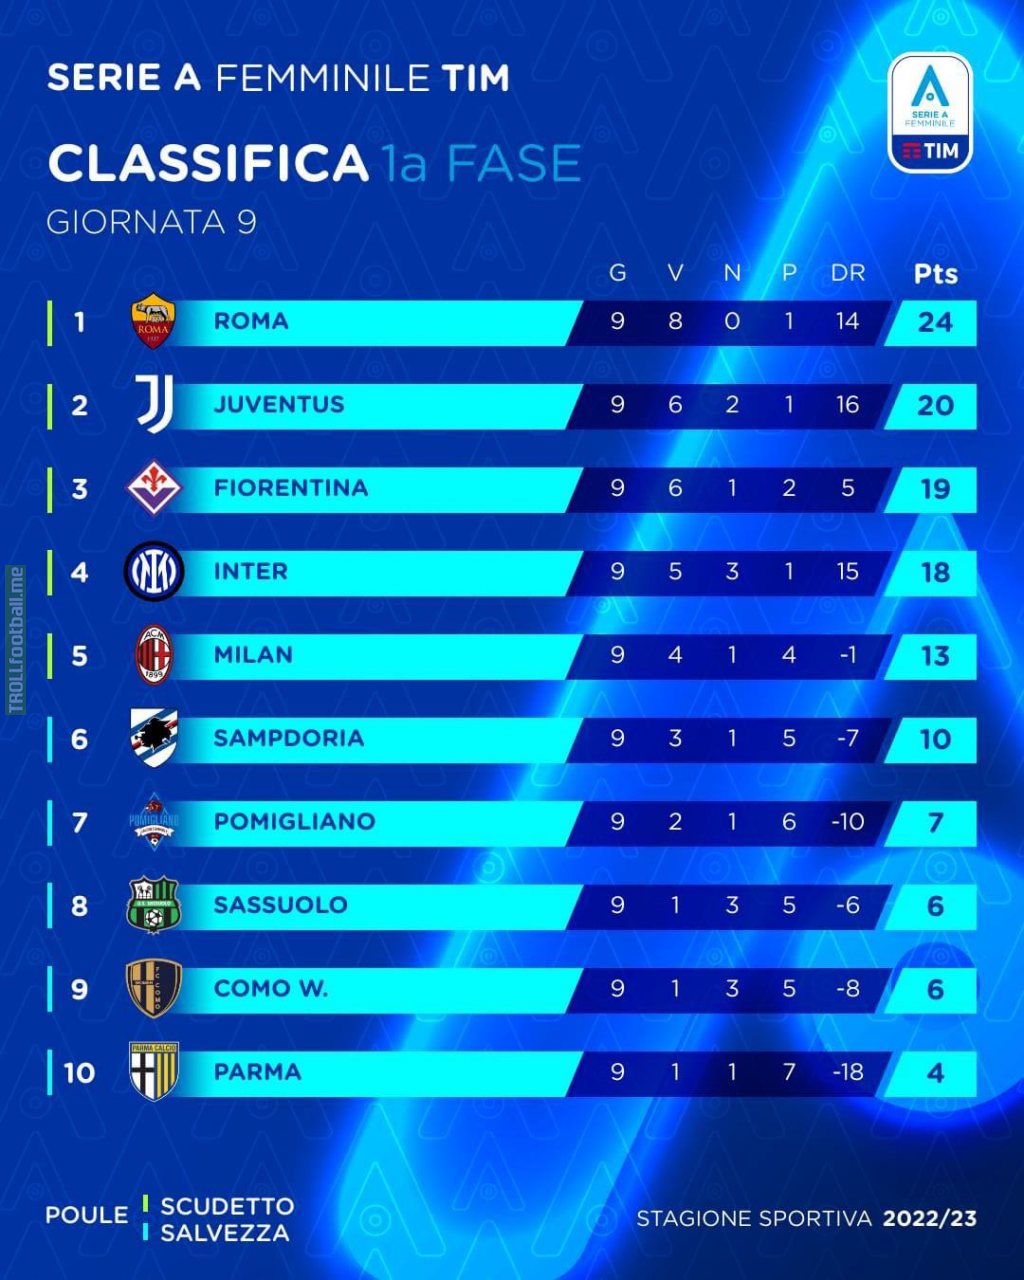 Halfway through the Serie A Femminile season, Roma lead with Juventus just behind them!